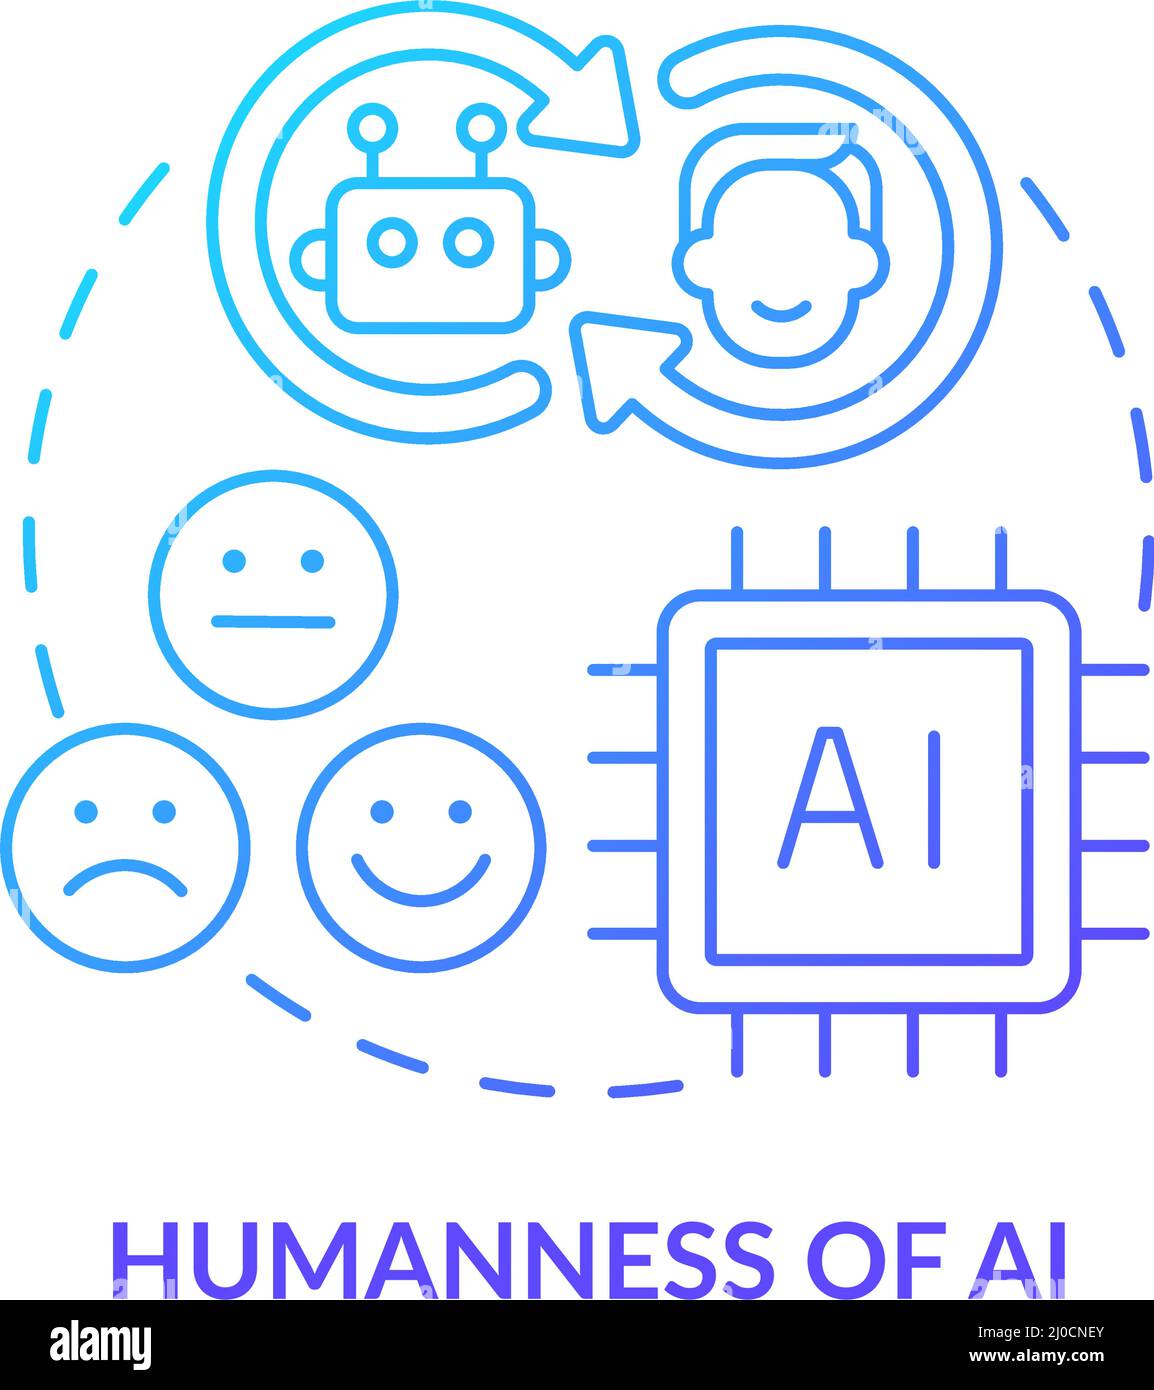 Humanness of AI blue gradient concept icon Stock Vector